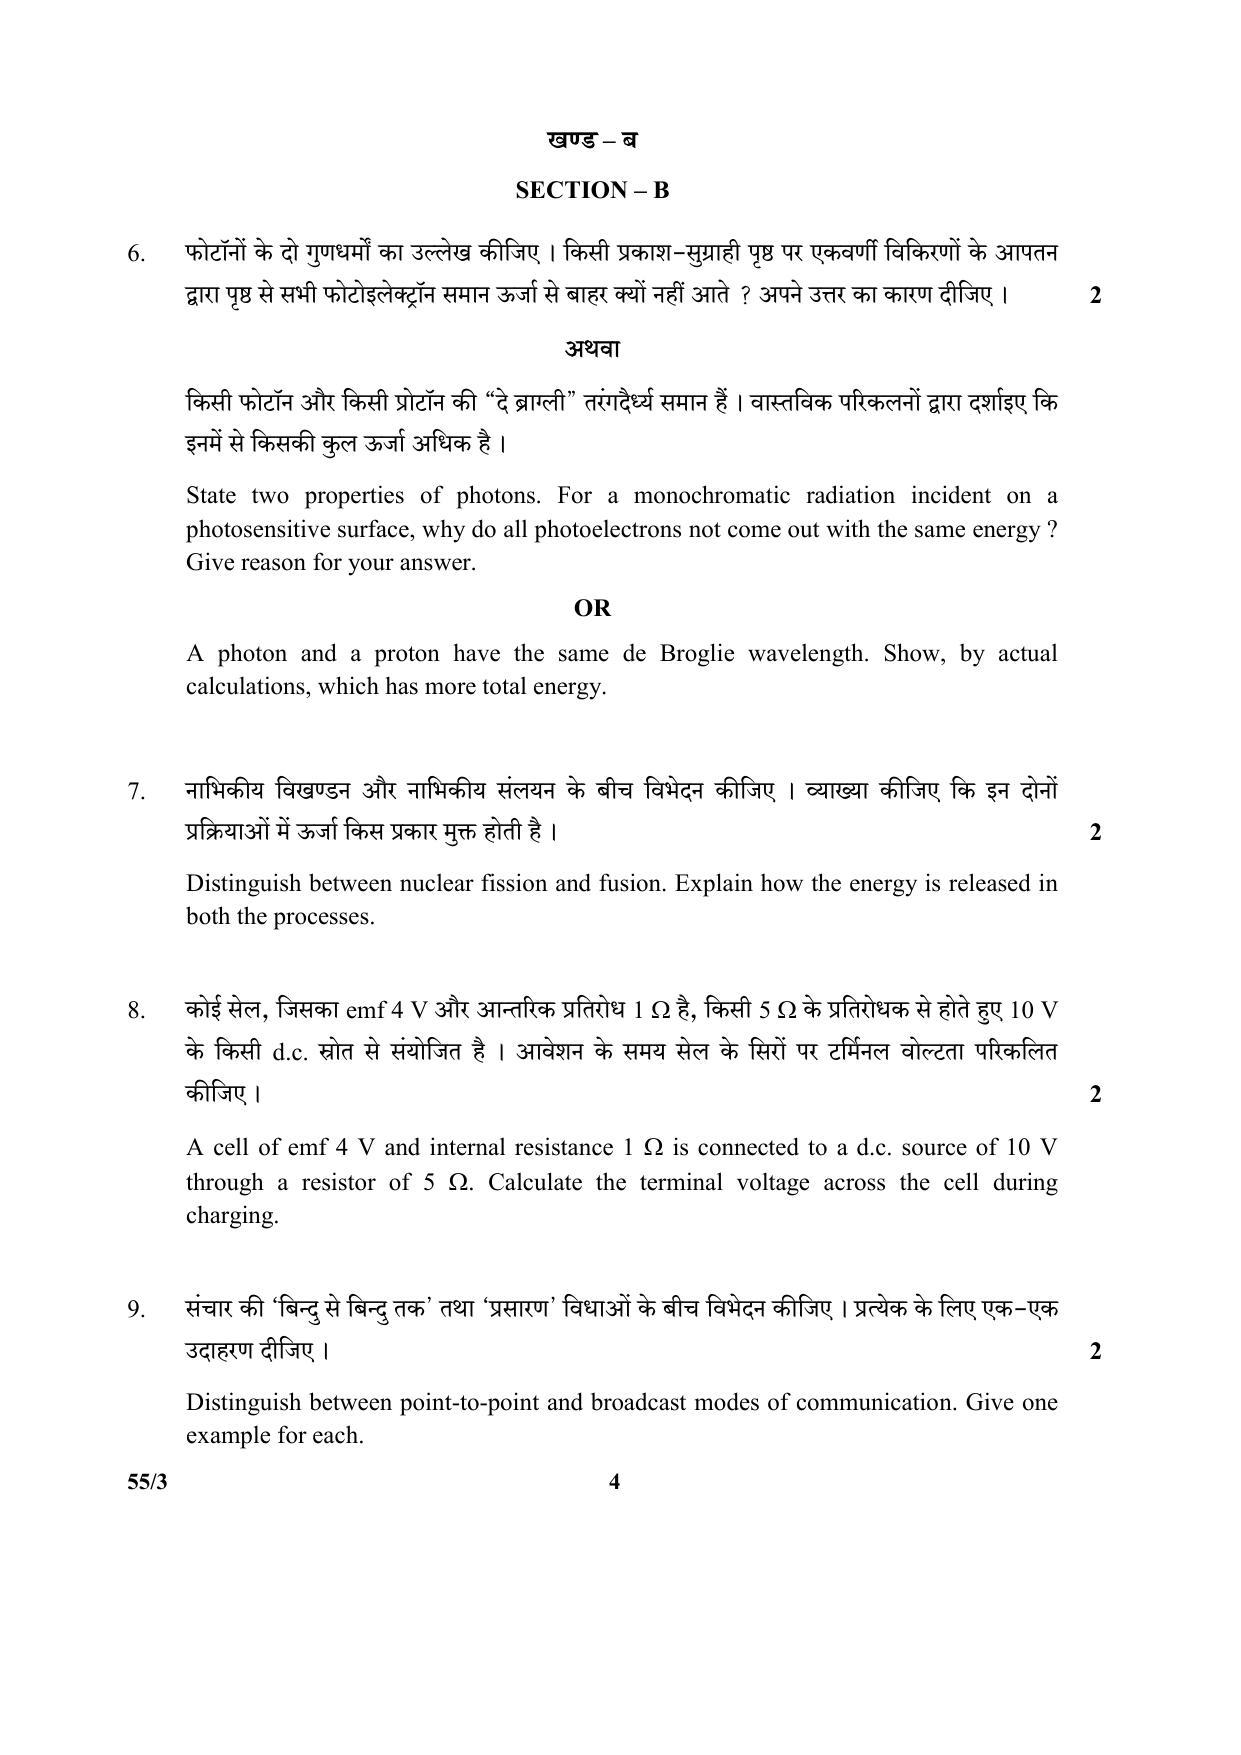 CBSE Class 12 55-3 (Physics) 2017-comptt Question Paper - Page 4